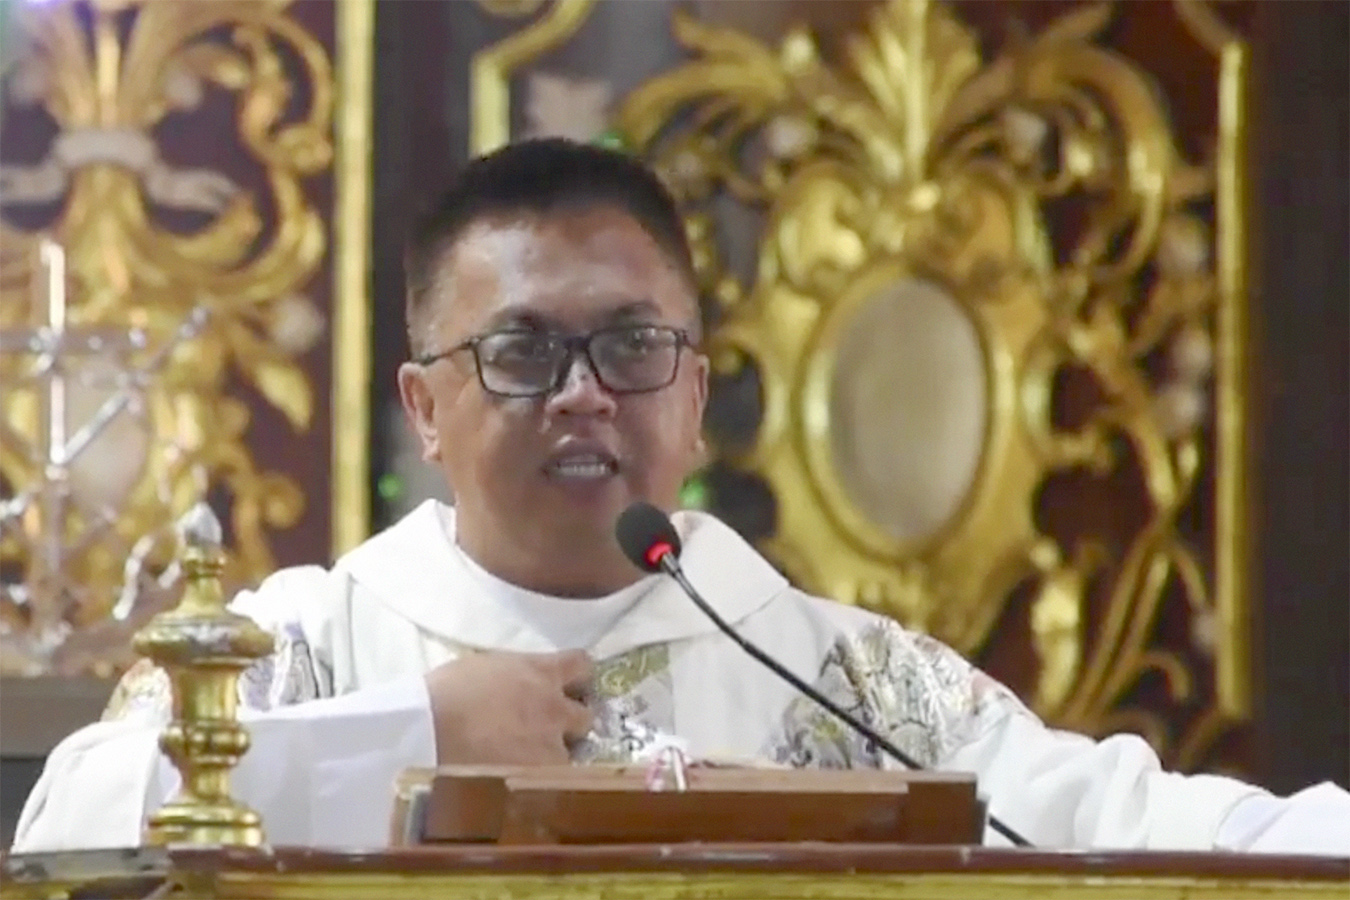 Bishop-elect Luisito Occiano of the Diocese of Virac. SCREENSHOT FROM ARCHDIOCESAN SHRINE OF ST. JOSEPH VIDEO